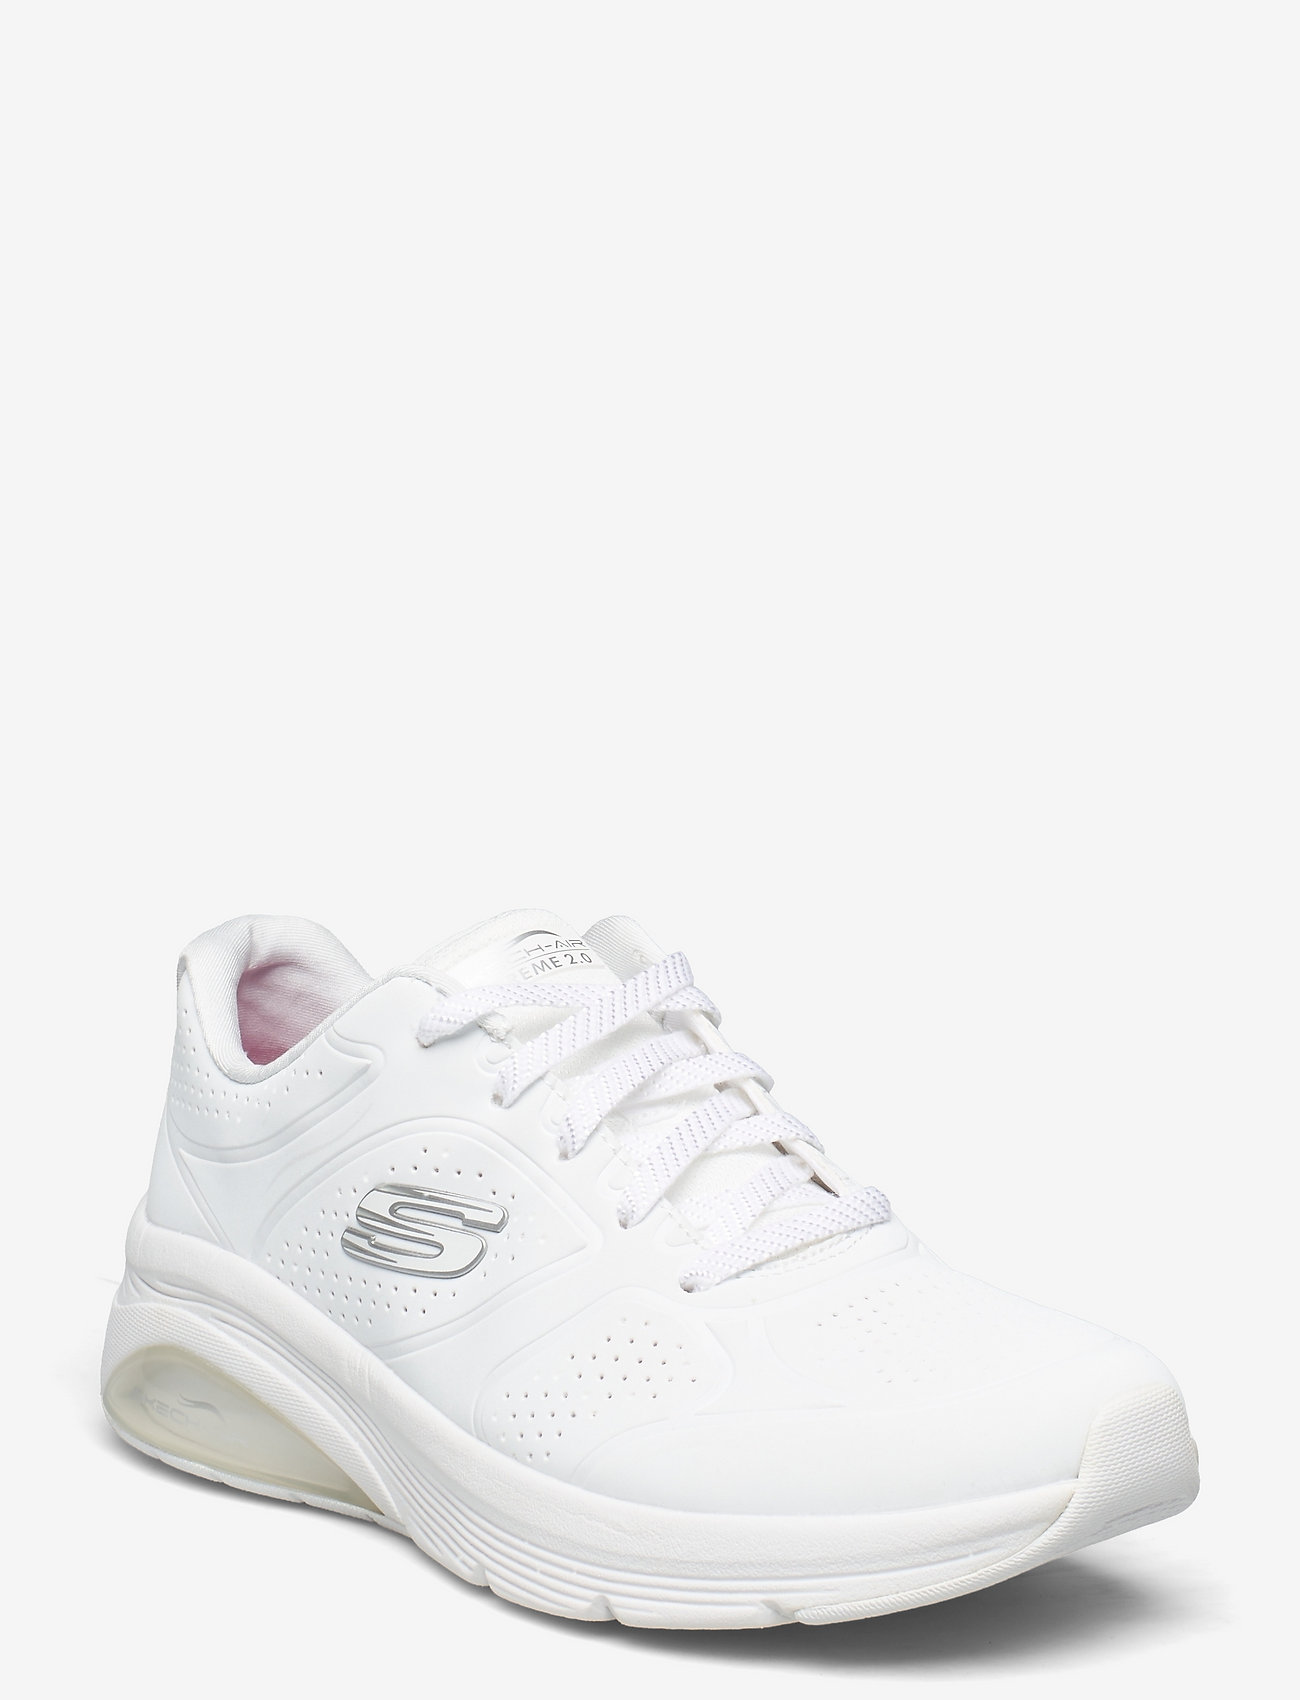 Skechers Womens Skech-air Extreme 2.0 - Low top sneakers | Boozt.com